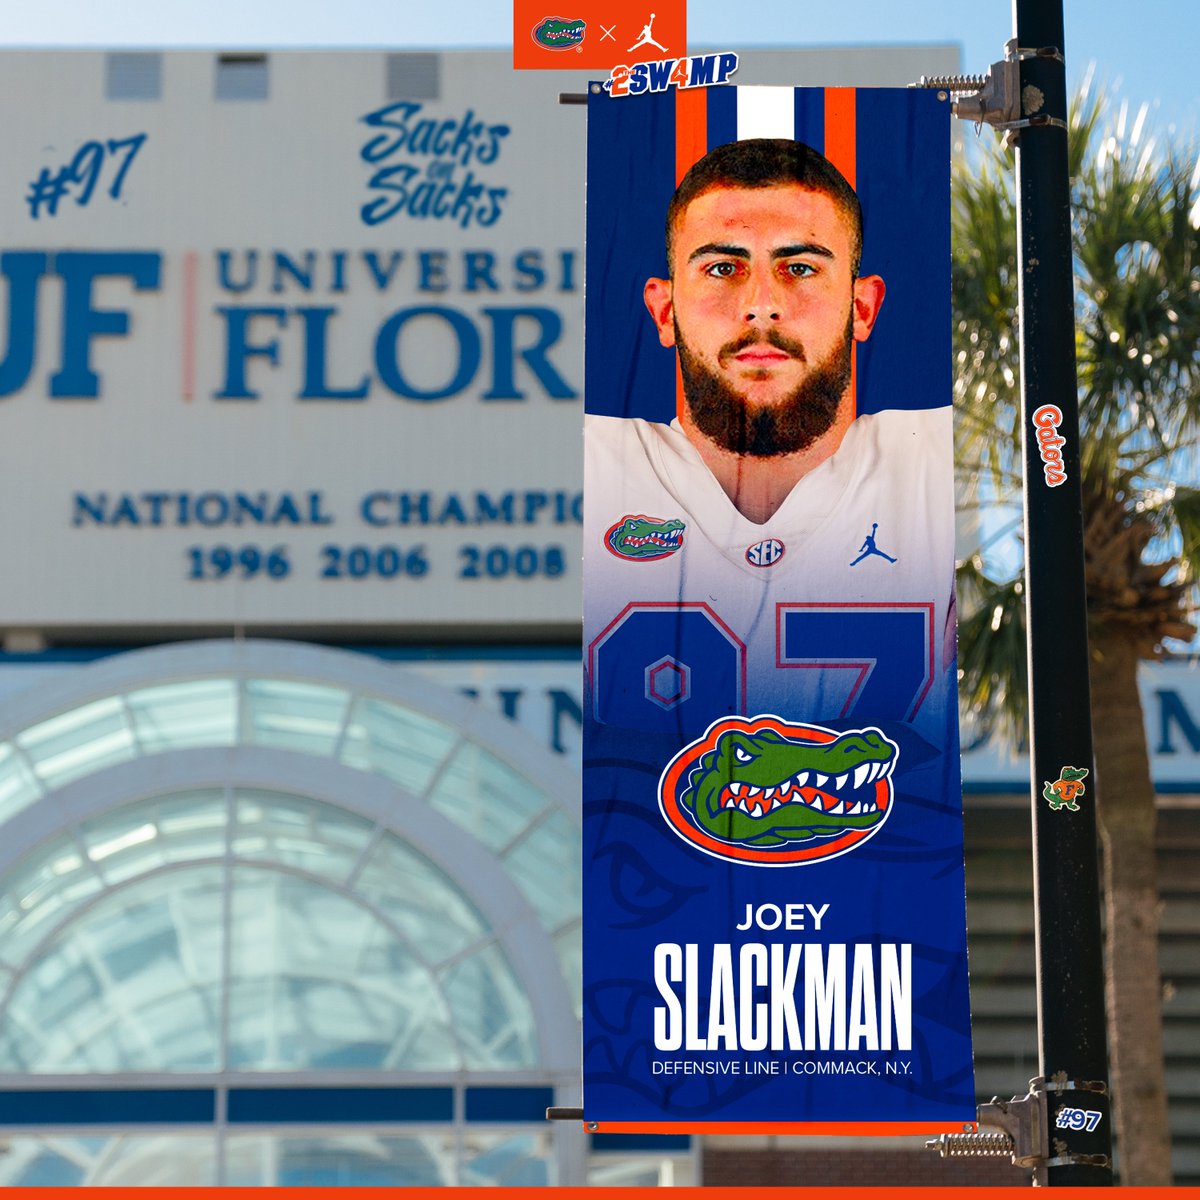 “My teammates can expect someone who is going to come in, put his head down and WORK. Nothing else matters but the task at hand.” Welcome to The Swamp, @JoeySlackman! #2THESW4MP